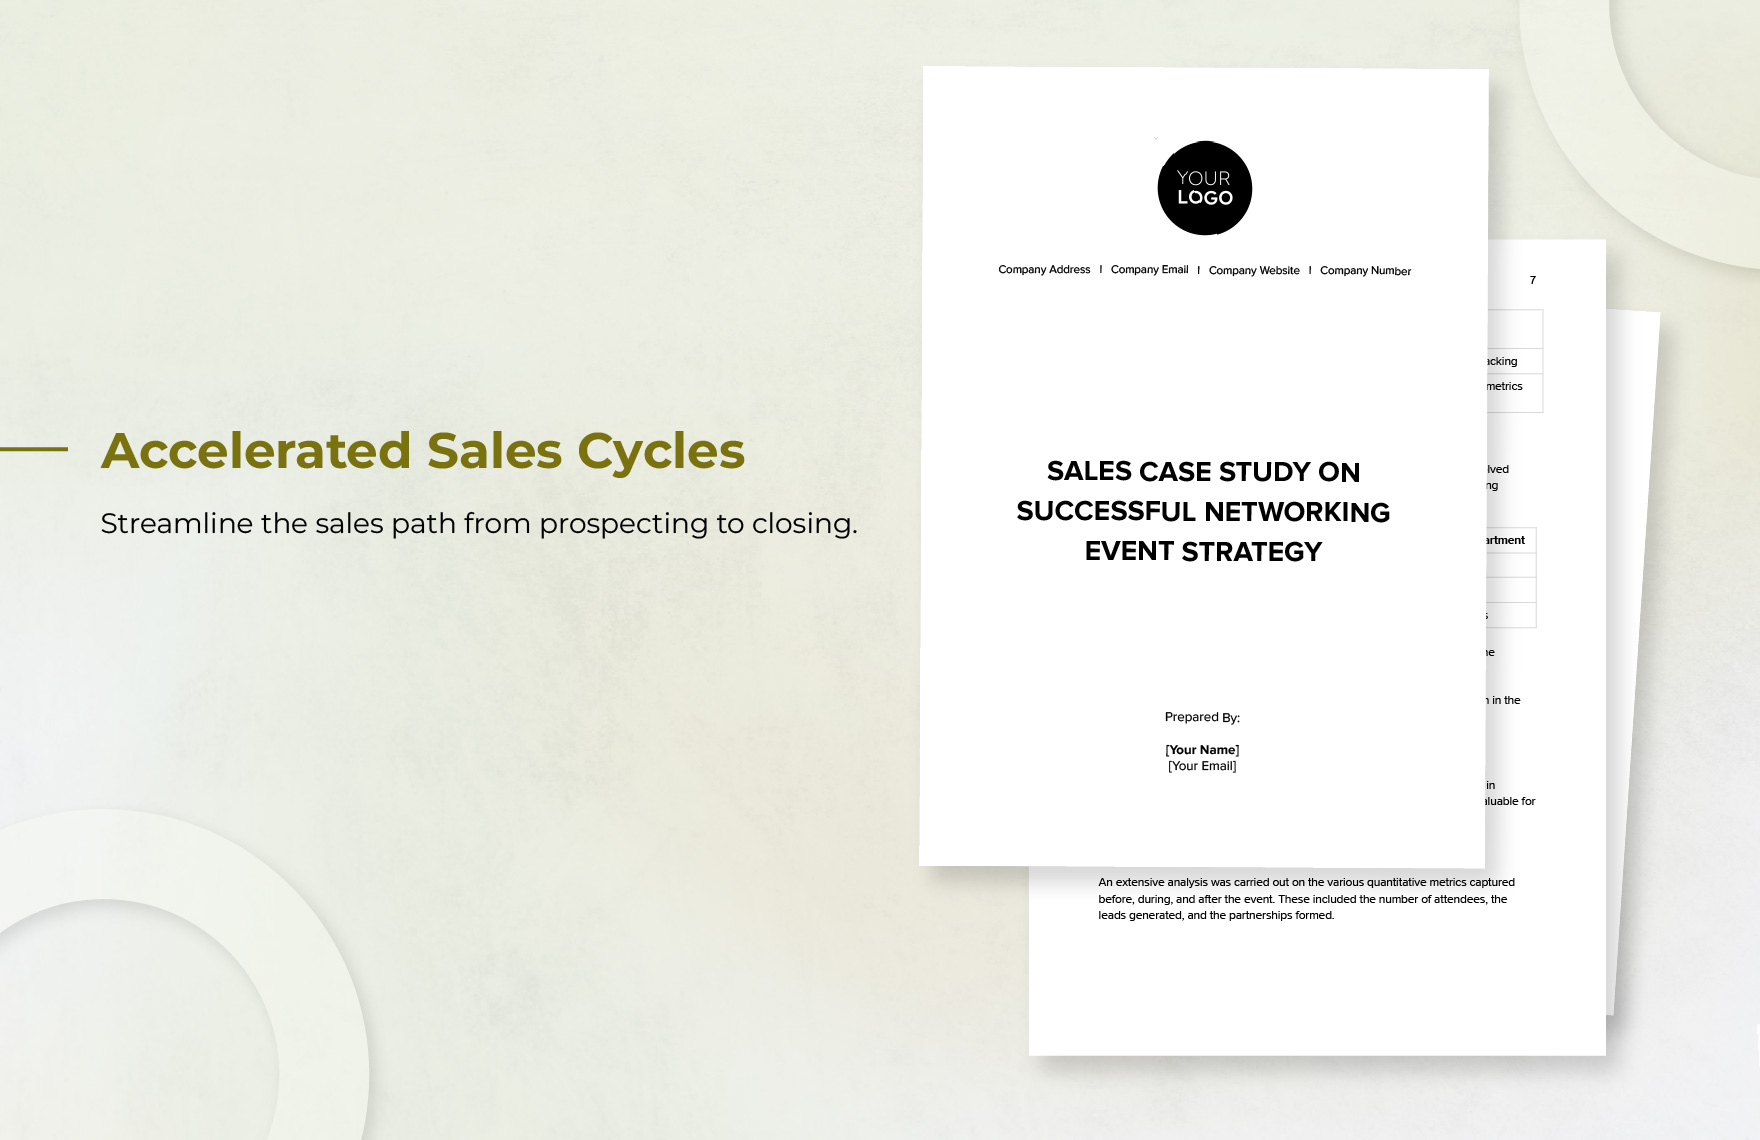 Sales Case Study on Successful Networking Event Strategy Template